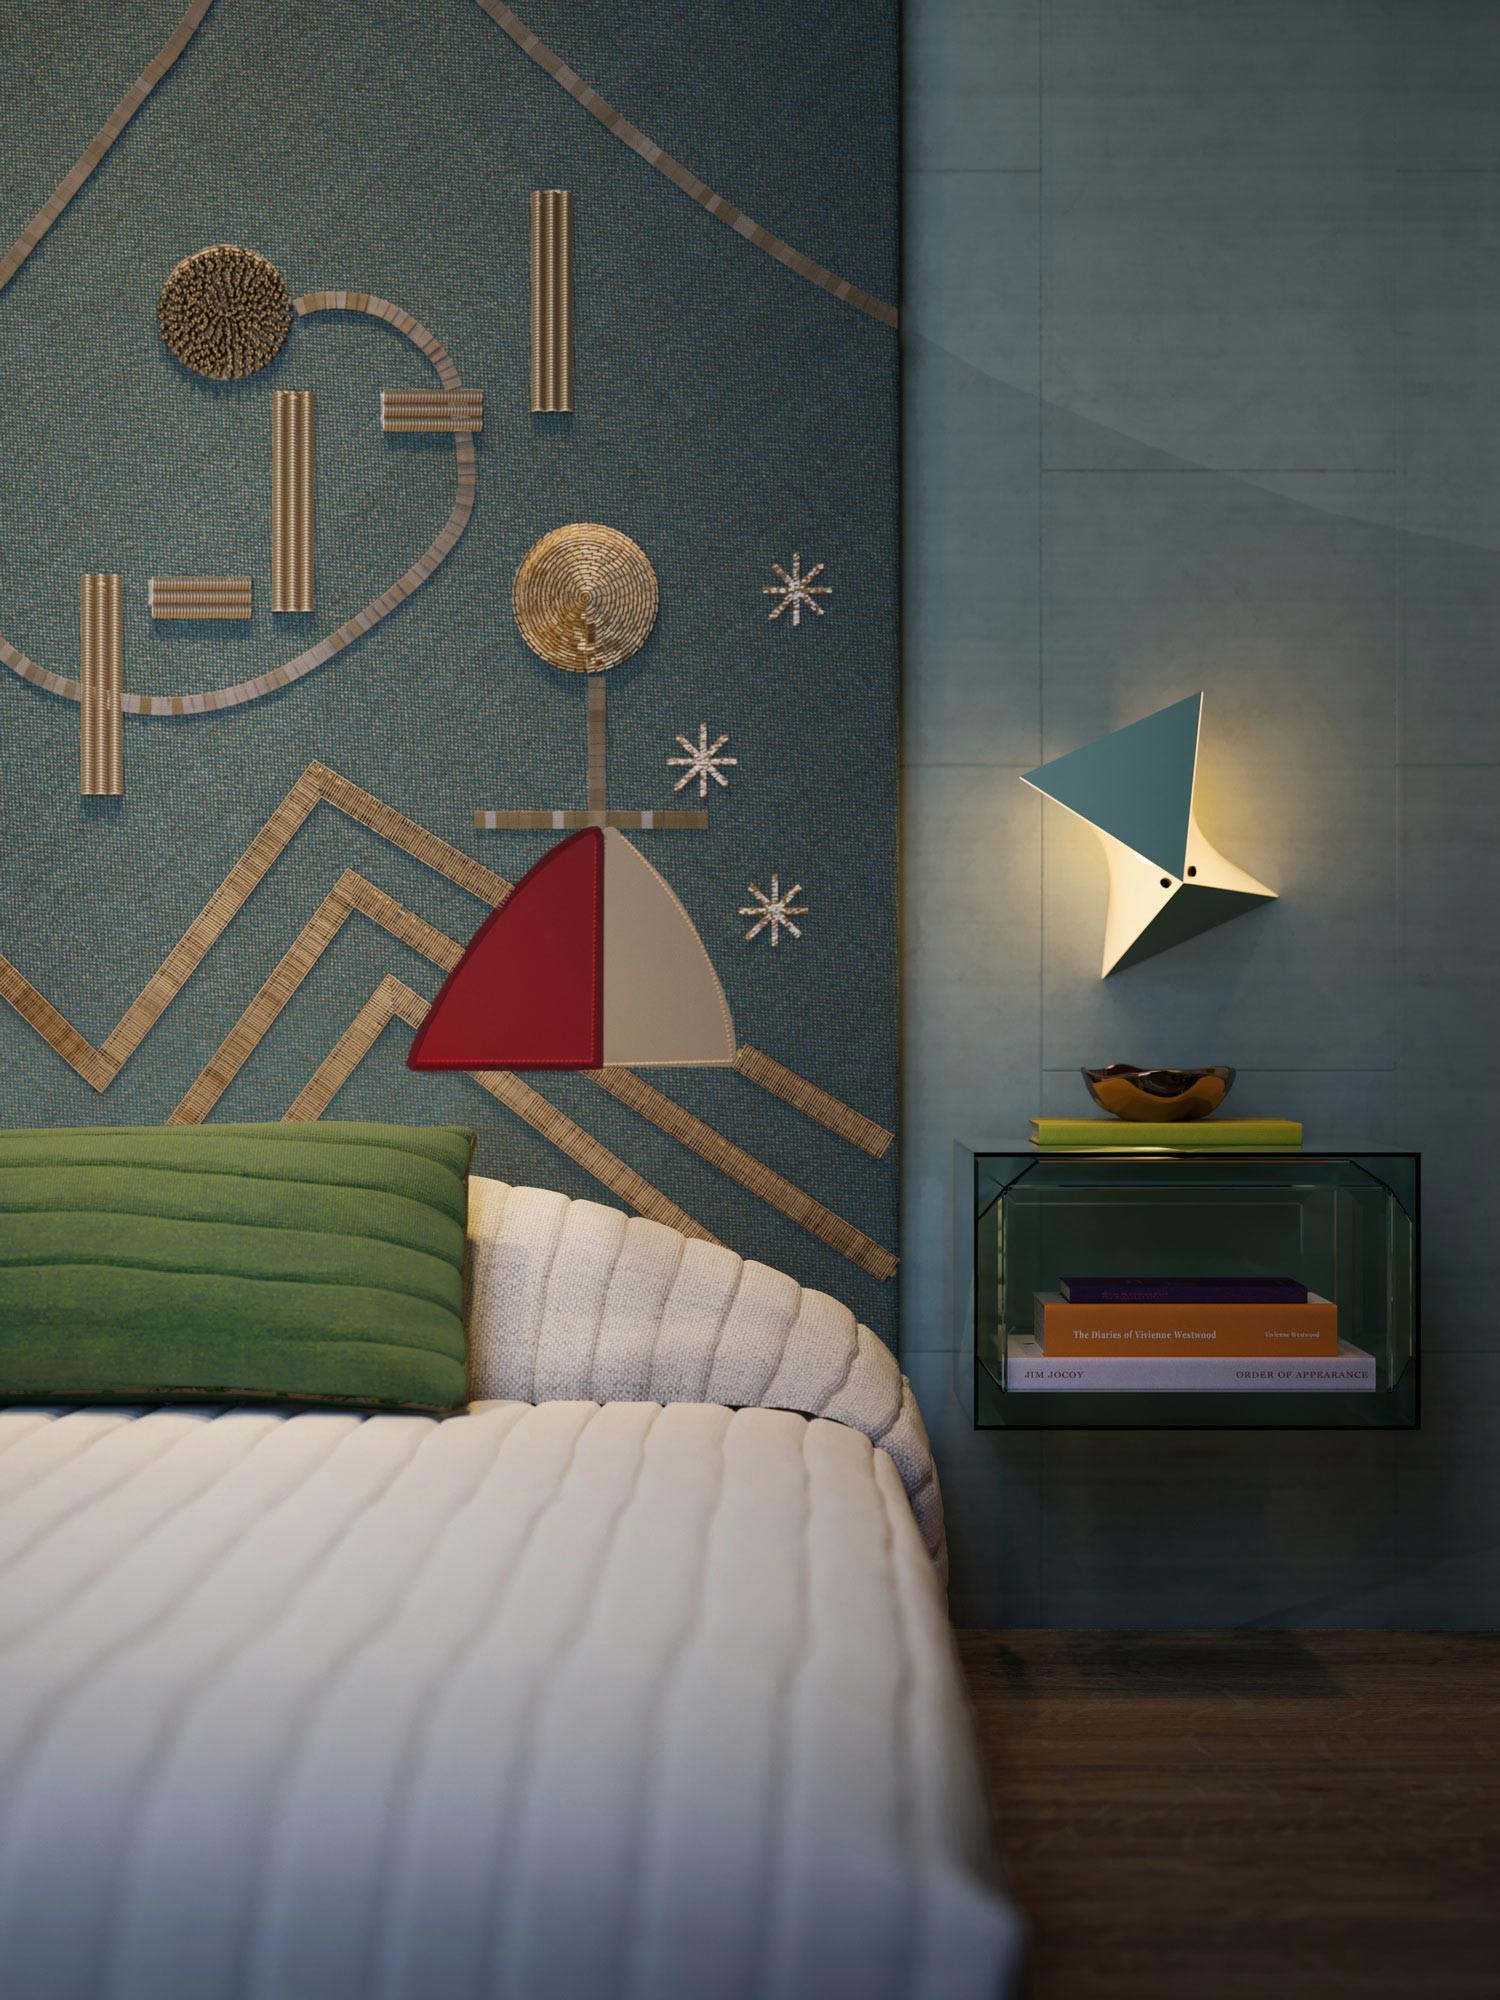 A bedroom detail with wall covering adorned with graphic shapes and stars